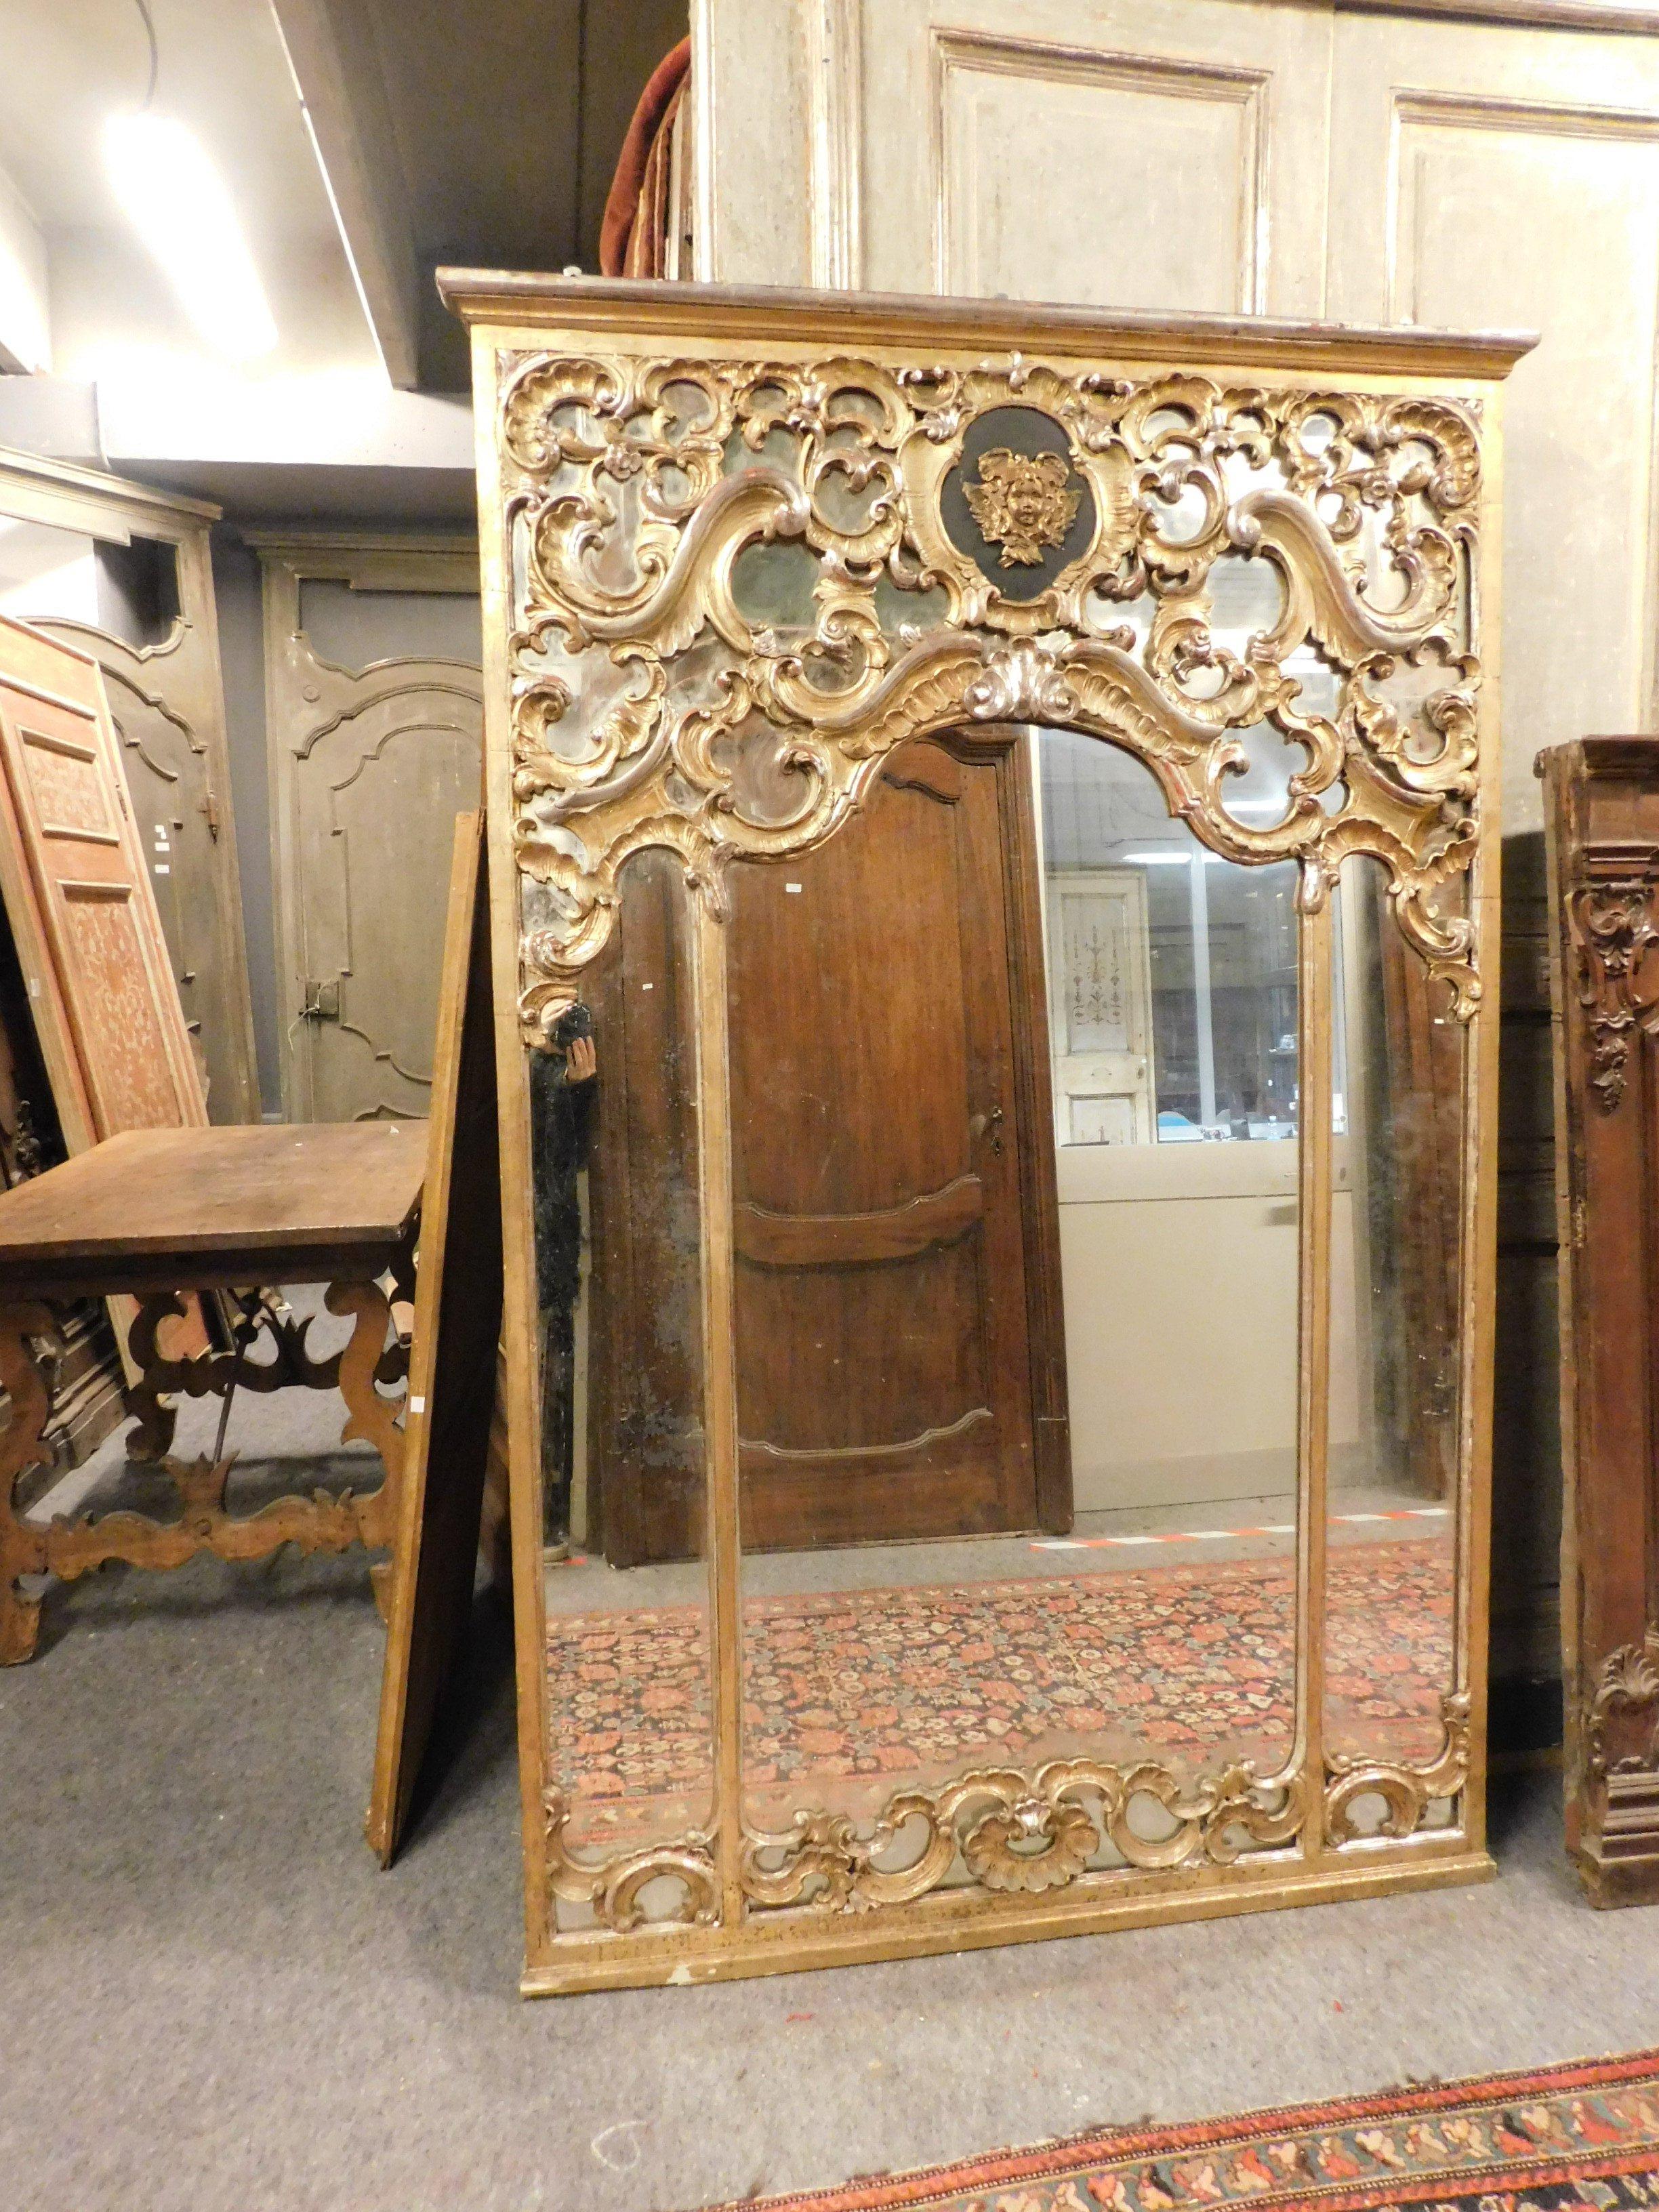 Antique mirror in gilded wood, with many curls and decorations, richly carved with central putto on black lacquered round, original leaf gilding, with beautiful patina produced over the centuries, mirror in excellent condition, built in the 18th